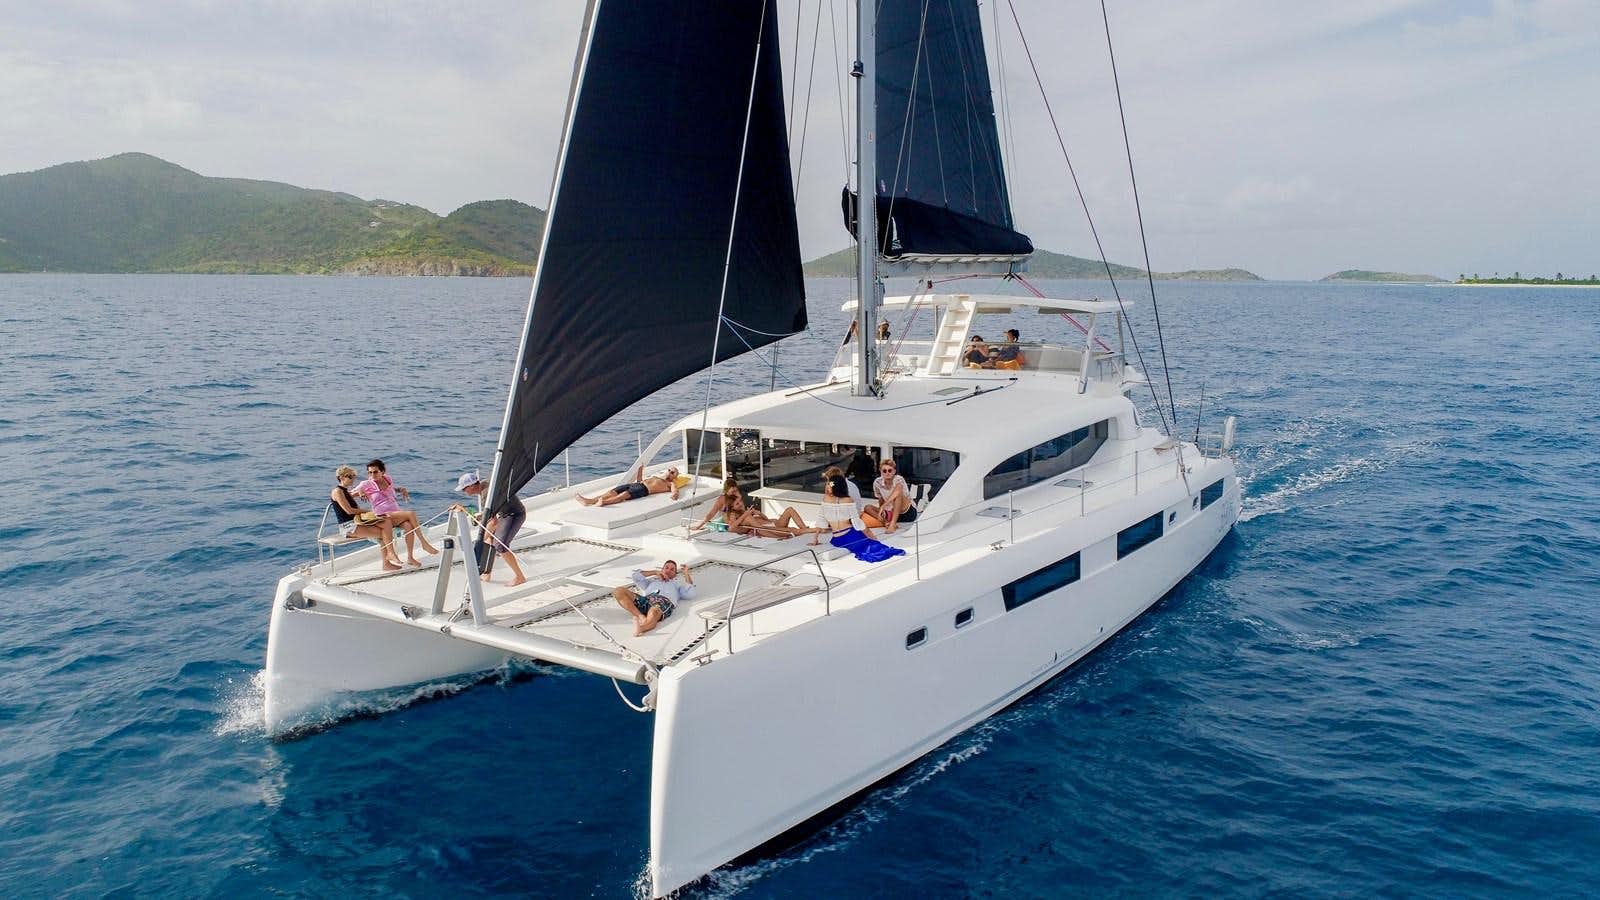 Voyage 590
Yacht for Sale